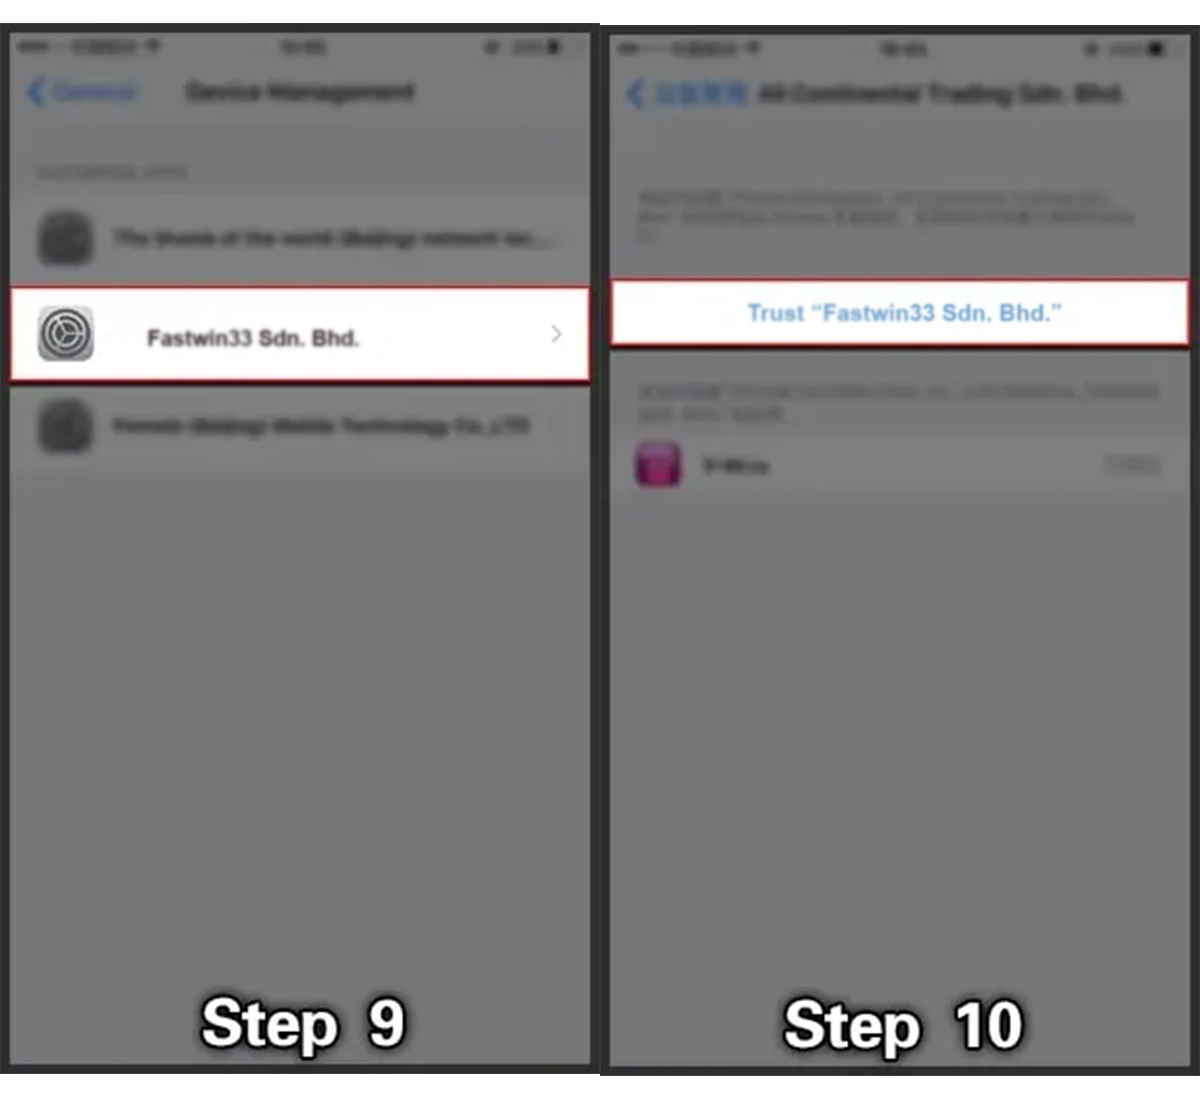 iOS installation step 9 and step 10